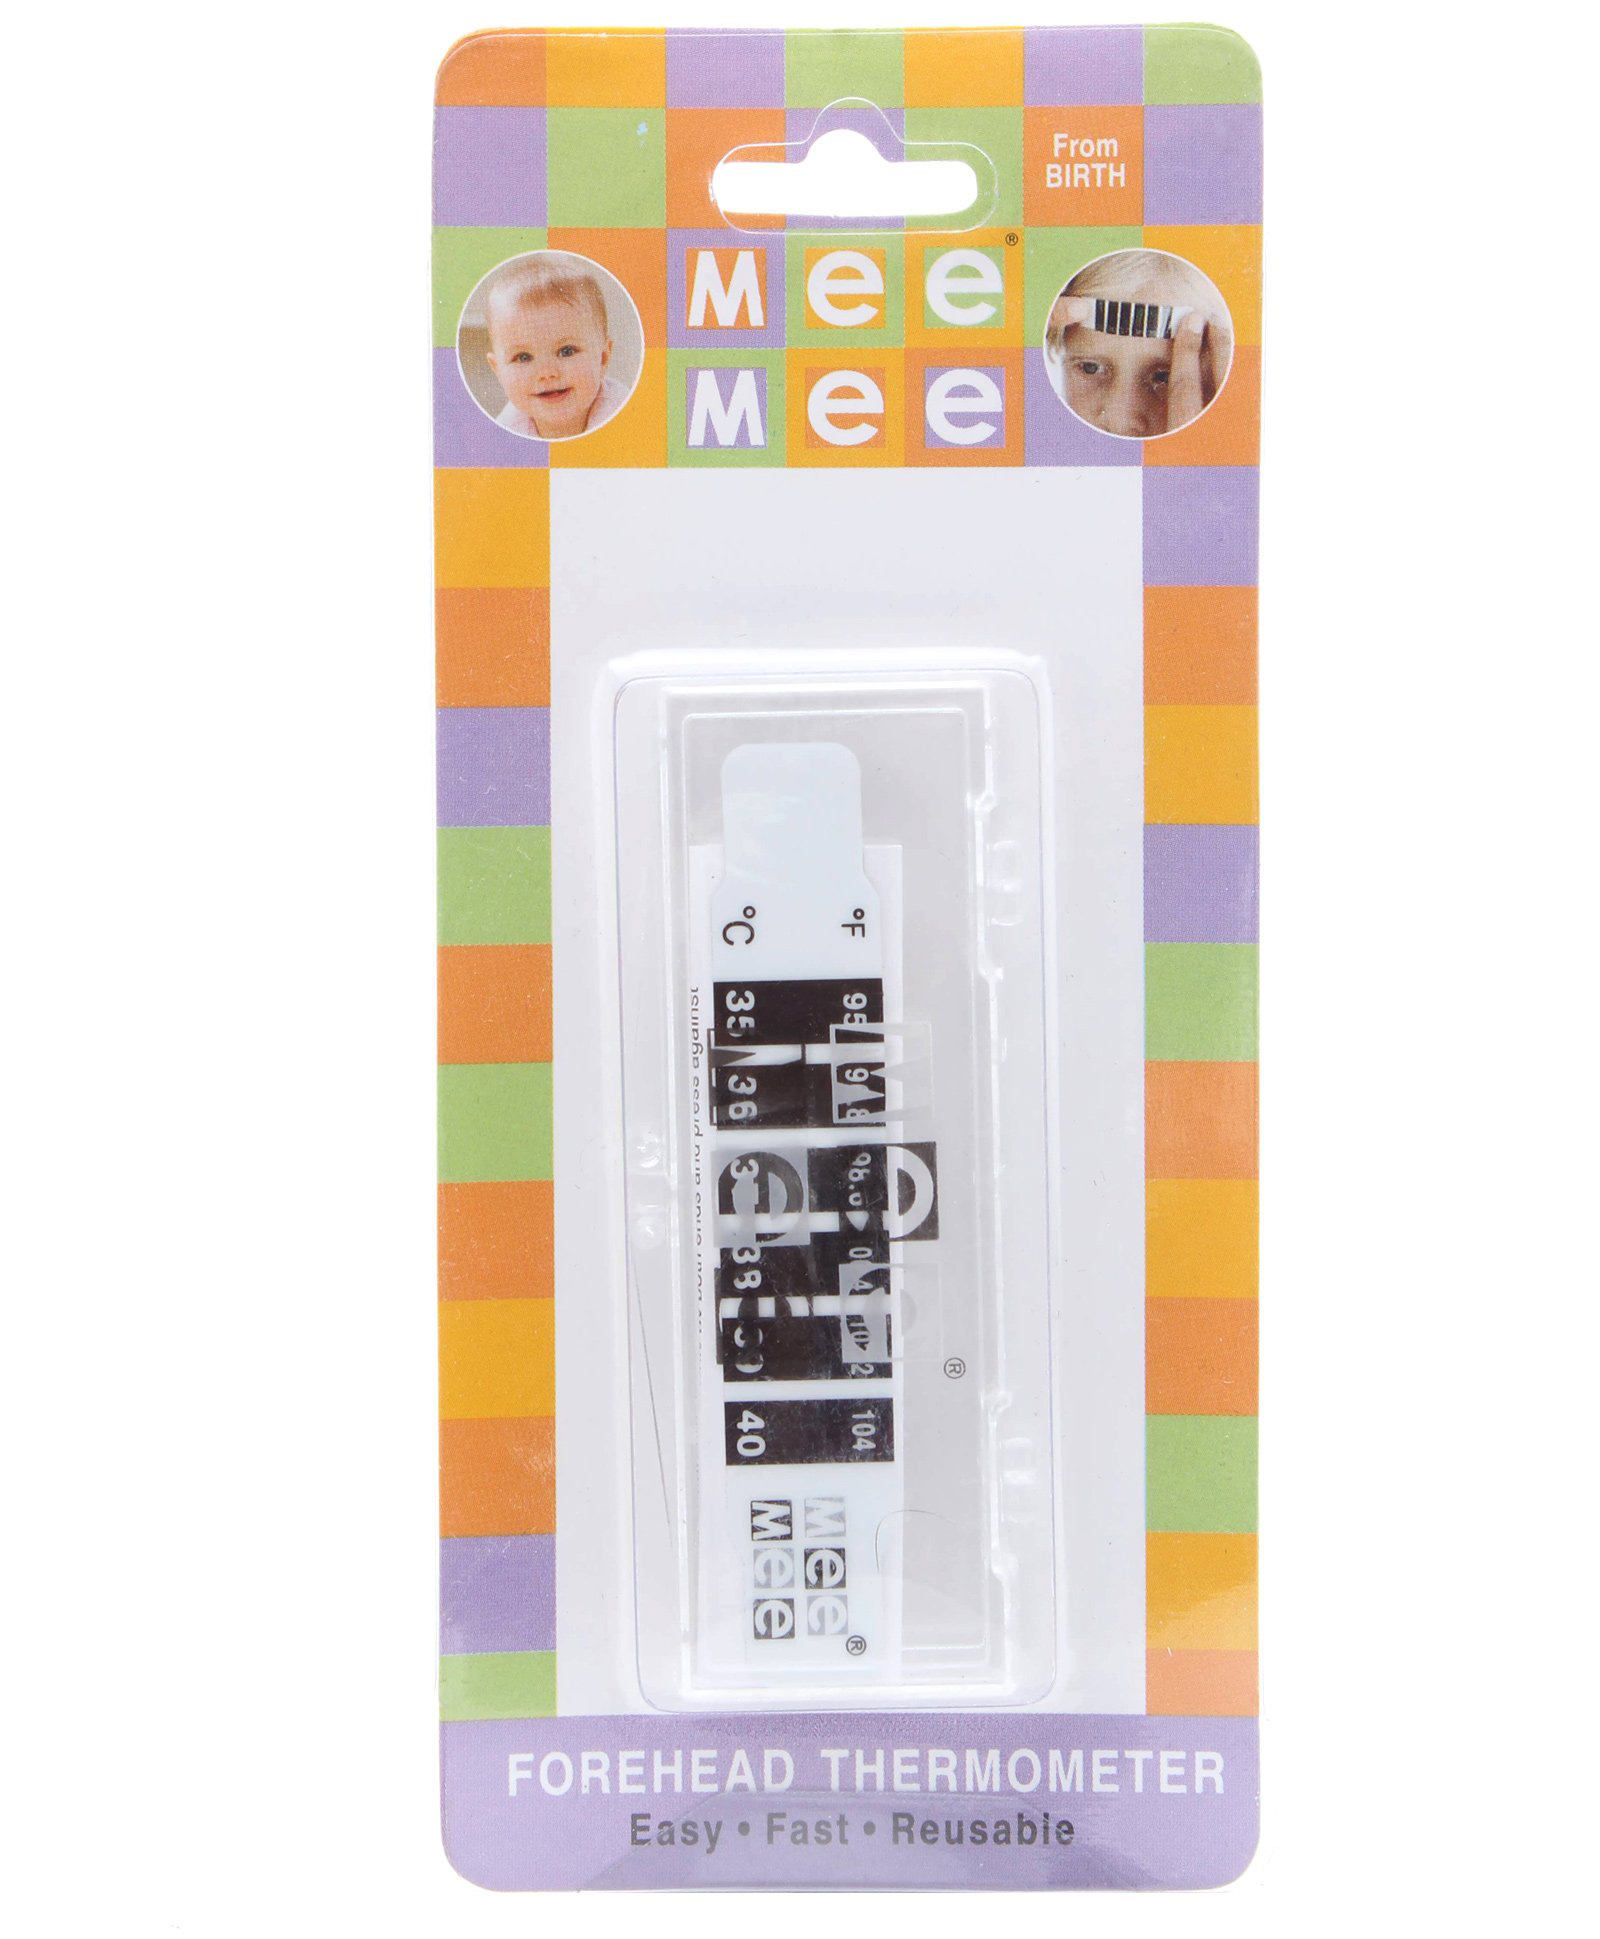 Mee Mee - Forehead Thermometer